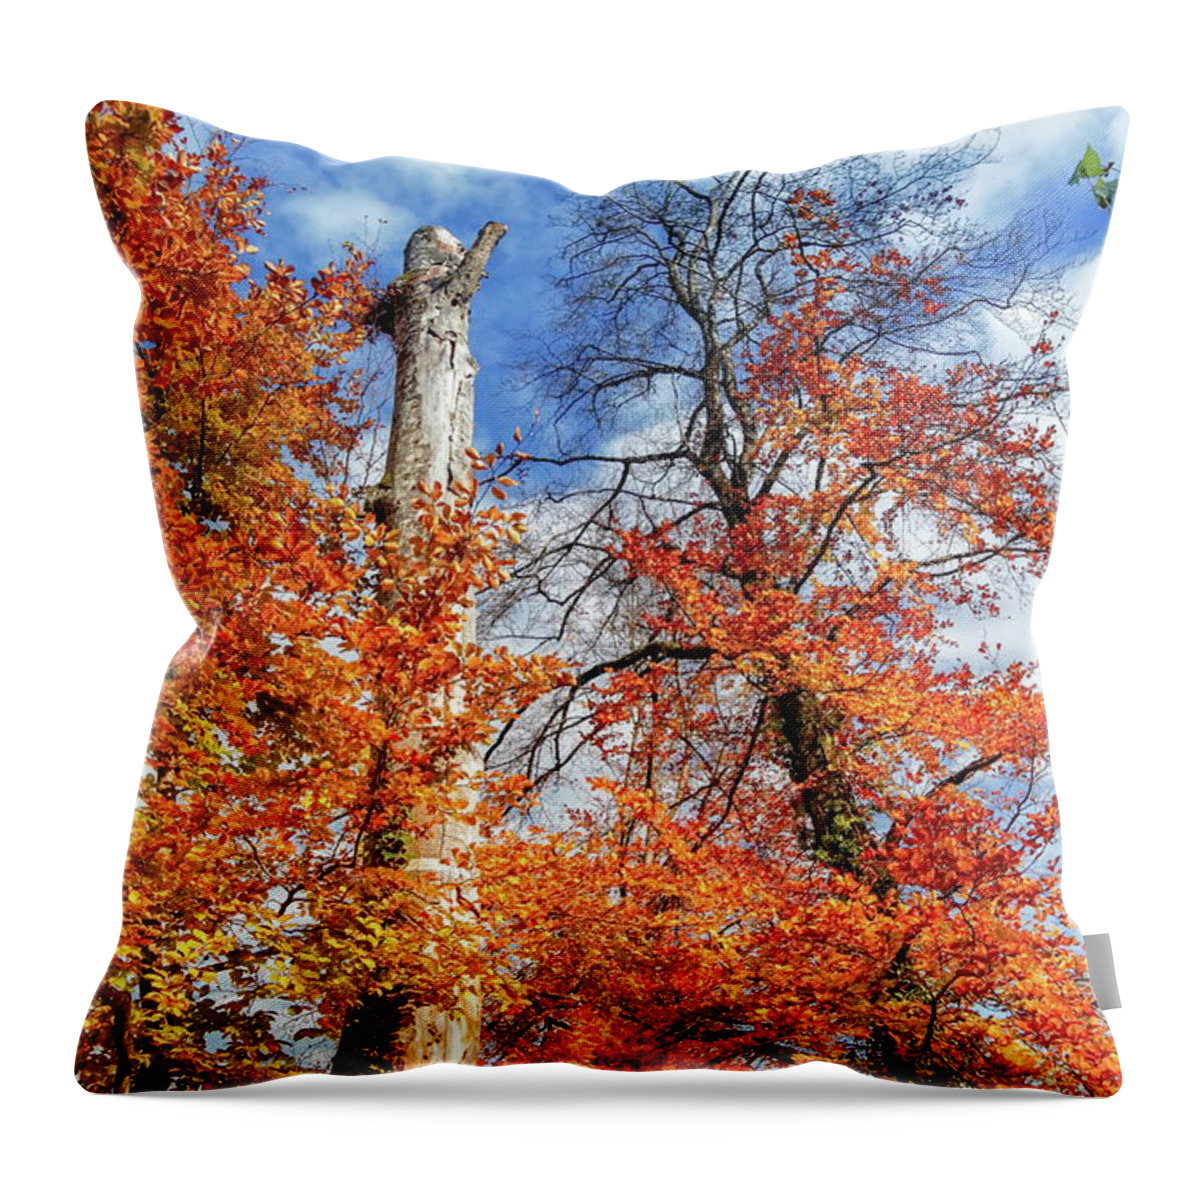 Park Throw Pillow featuring the photograph Autumn trees by day by Elenarts - Elena Duvernay photo